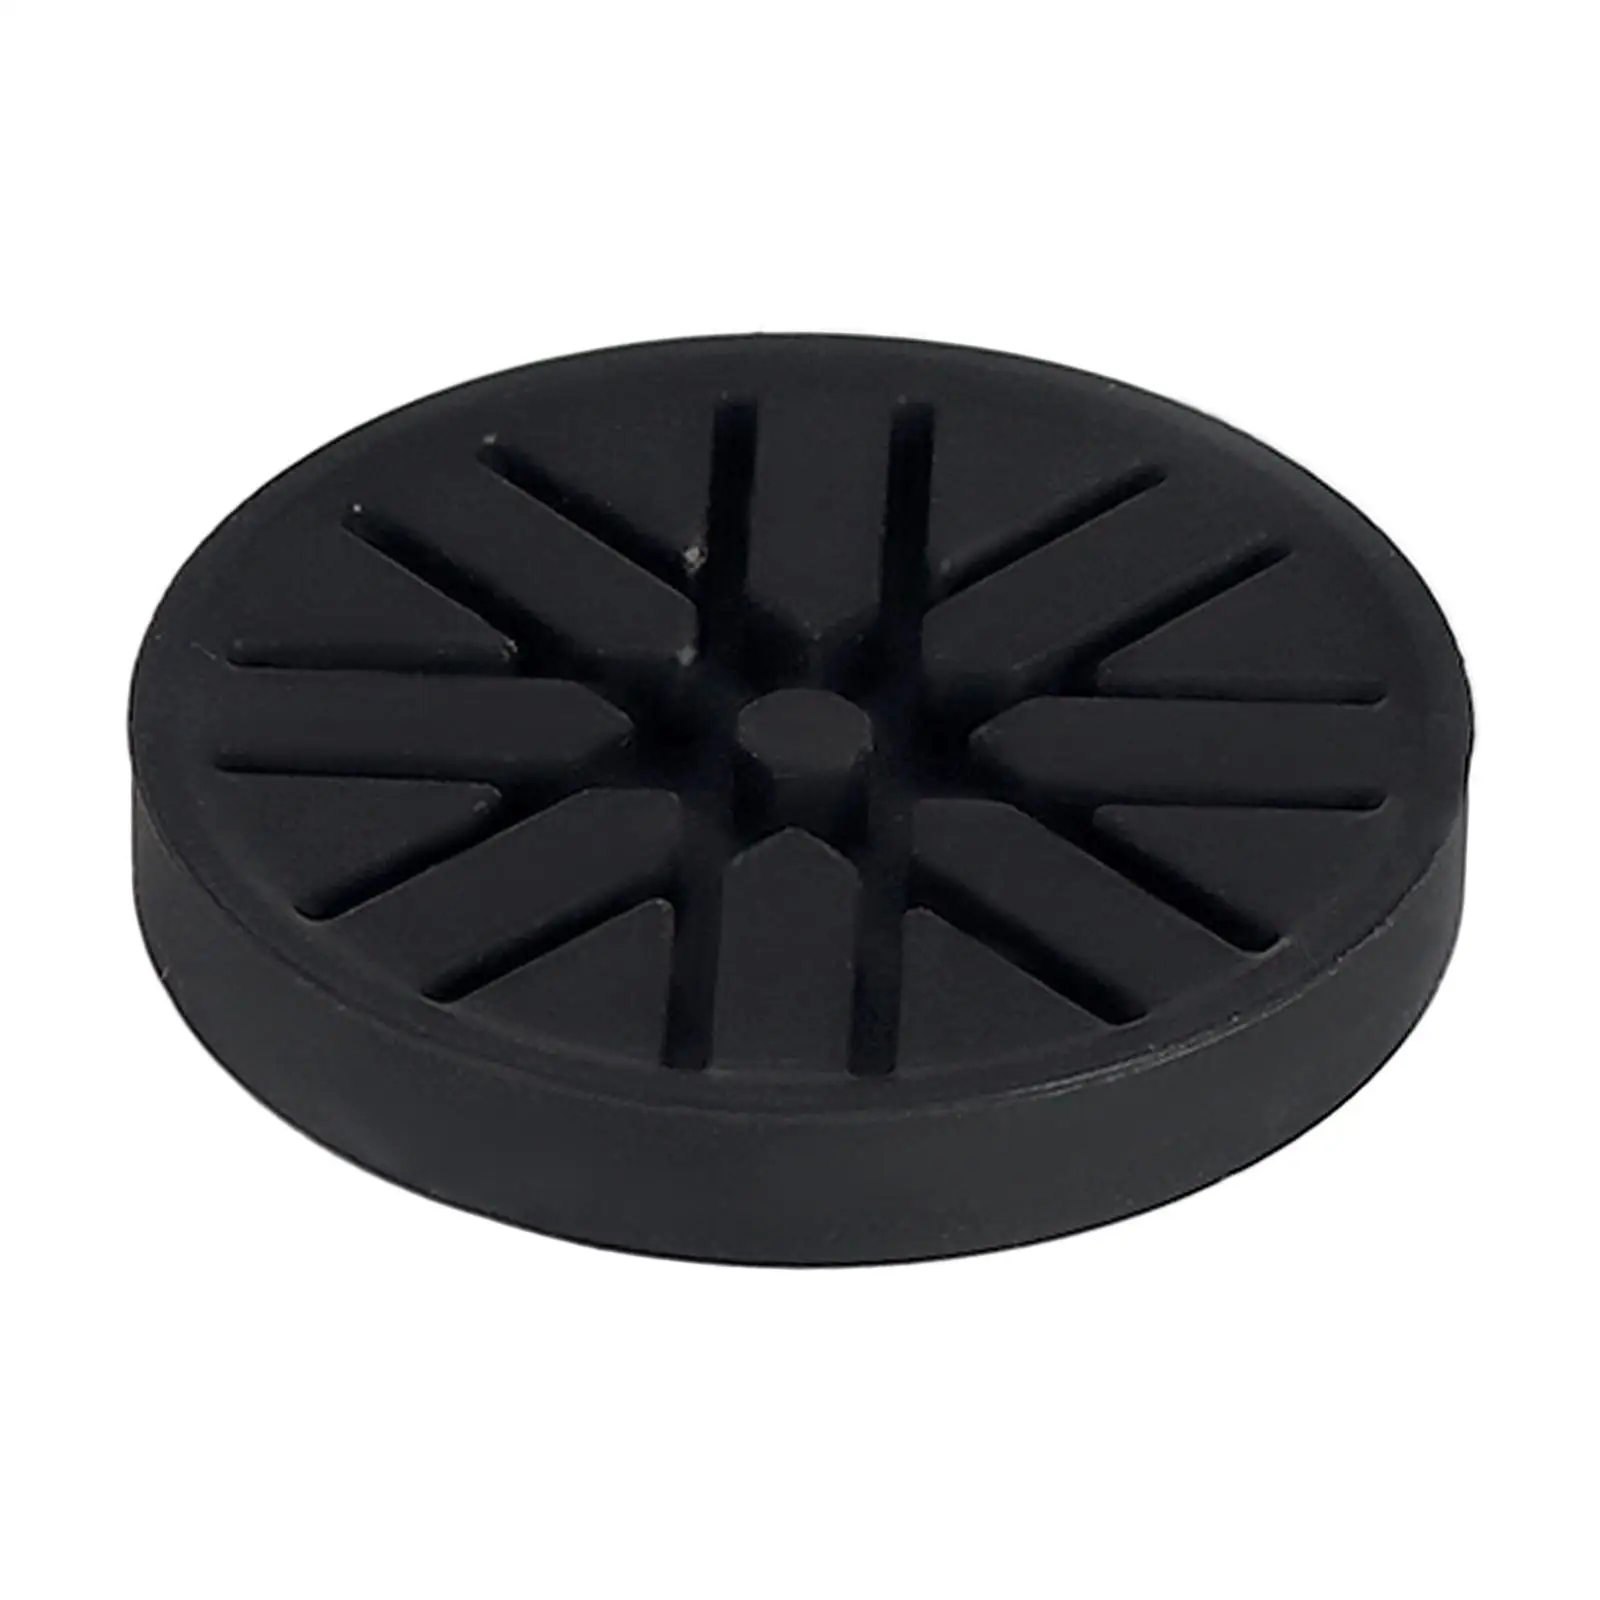 Silicone Puck Stand Holder for Reusable Basket Coffee Filters,Espresso Machine